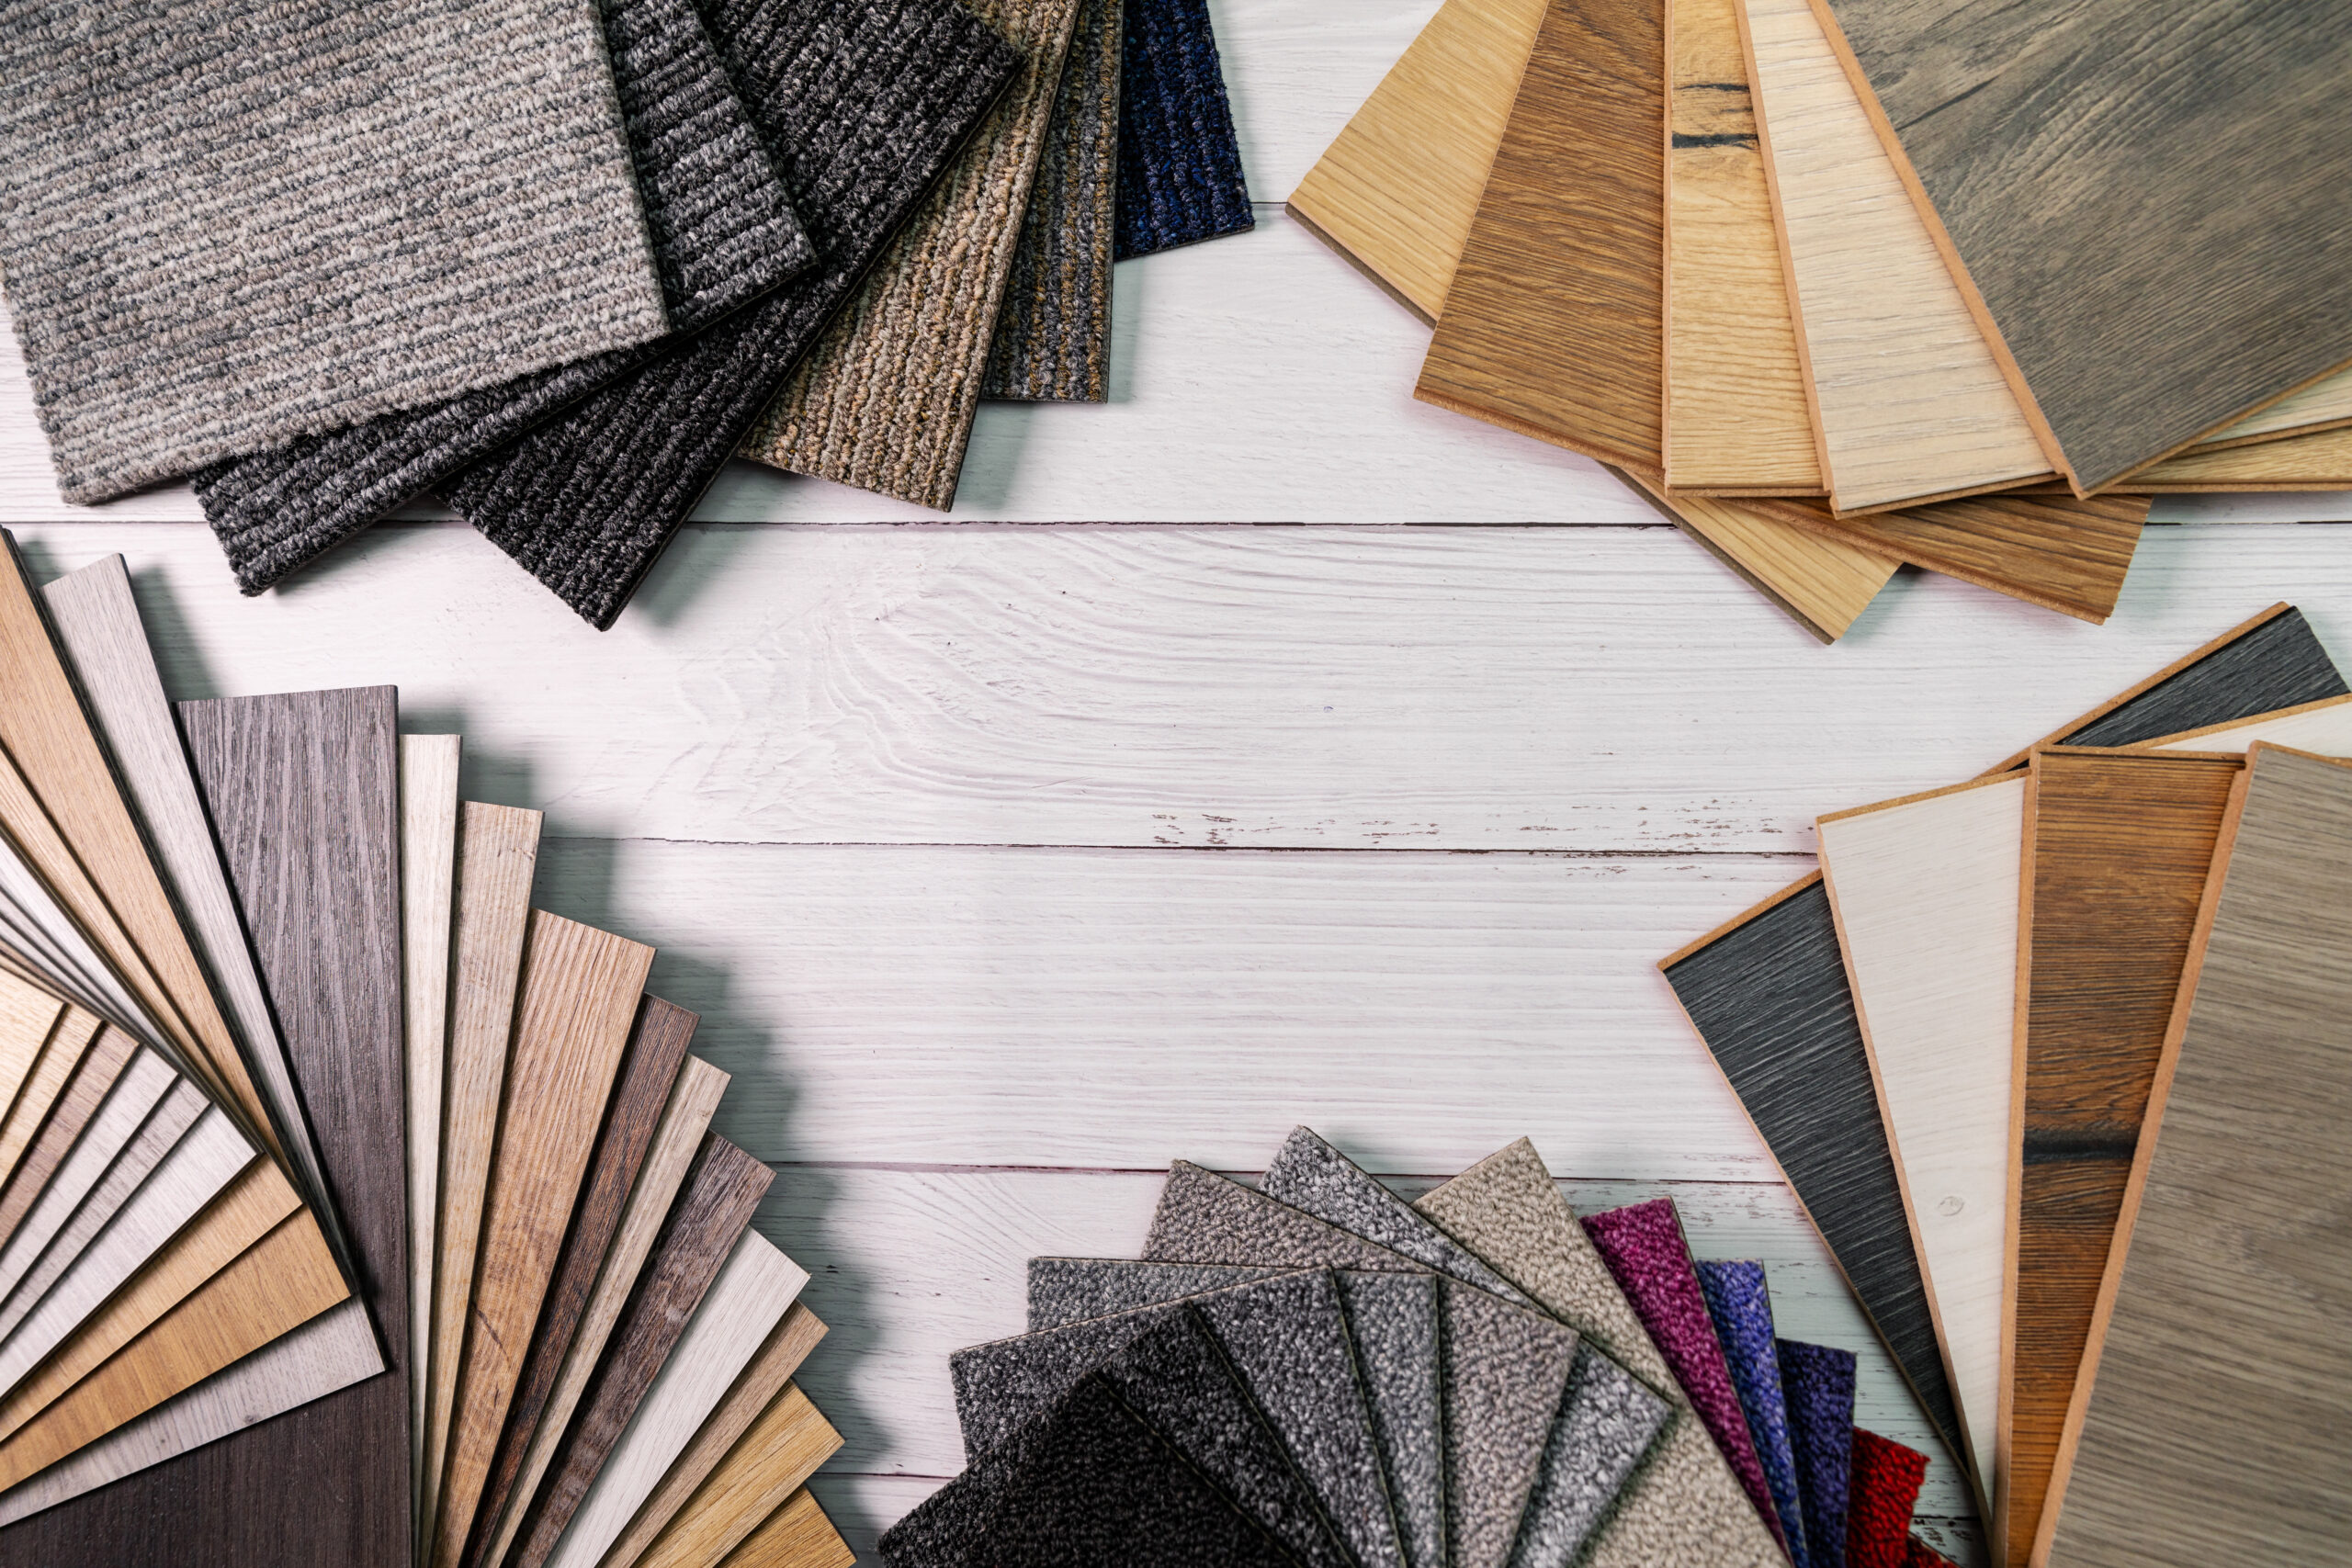 flooring and furniture materials - floor carpet and wooden laminate samples with copy space